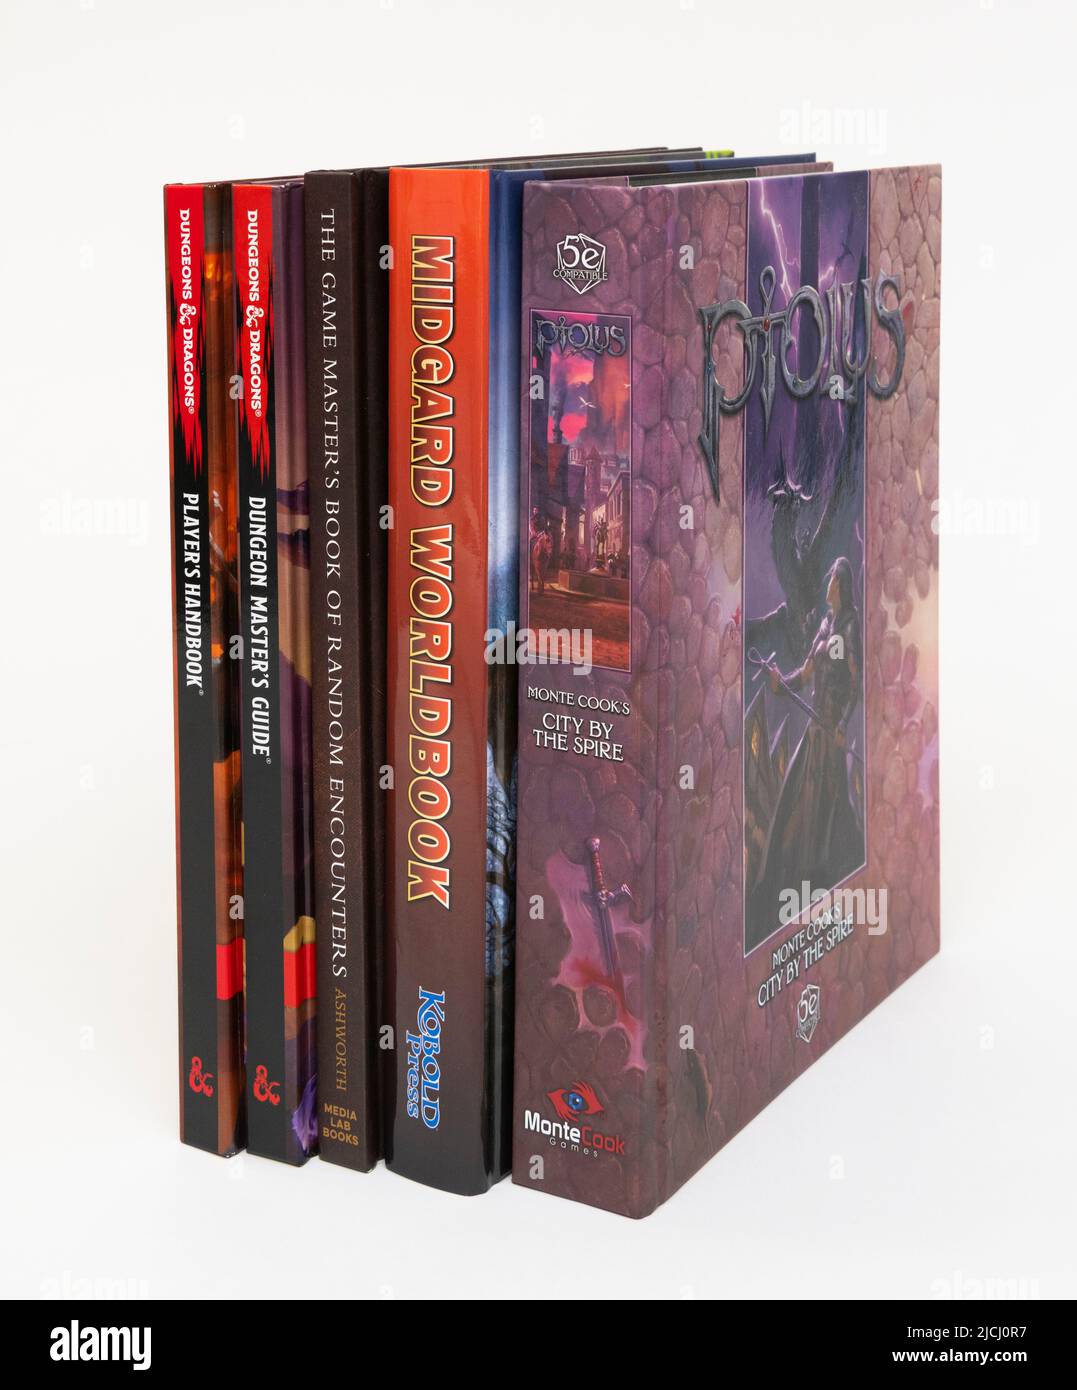 A collection of Dungeons and Dragons books. Stock Photo